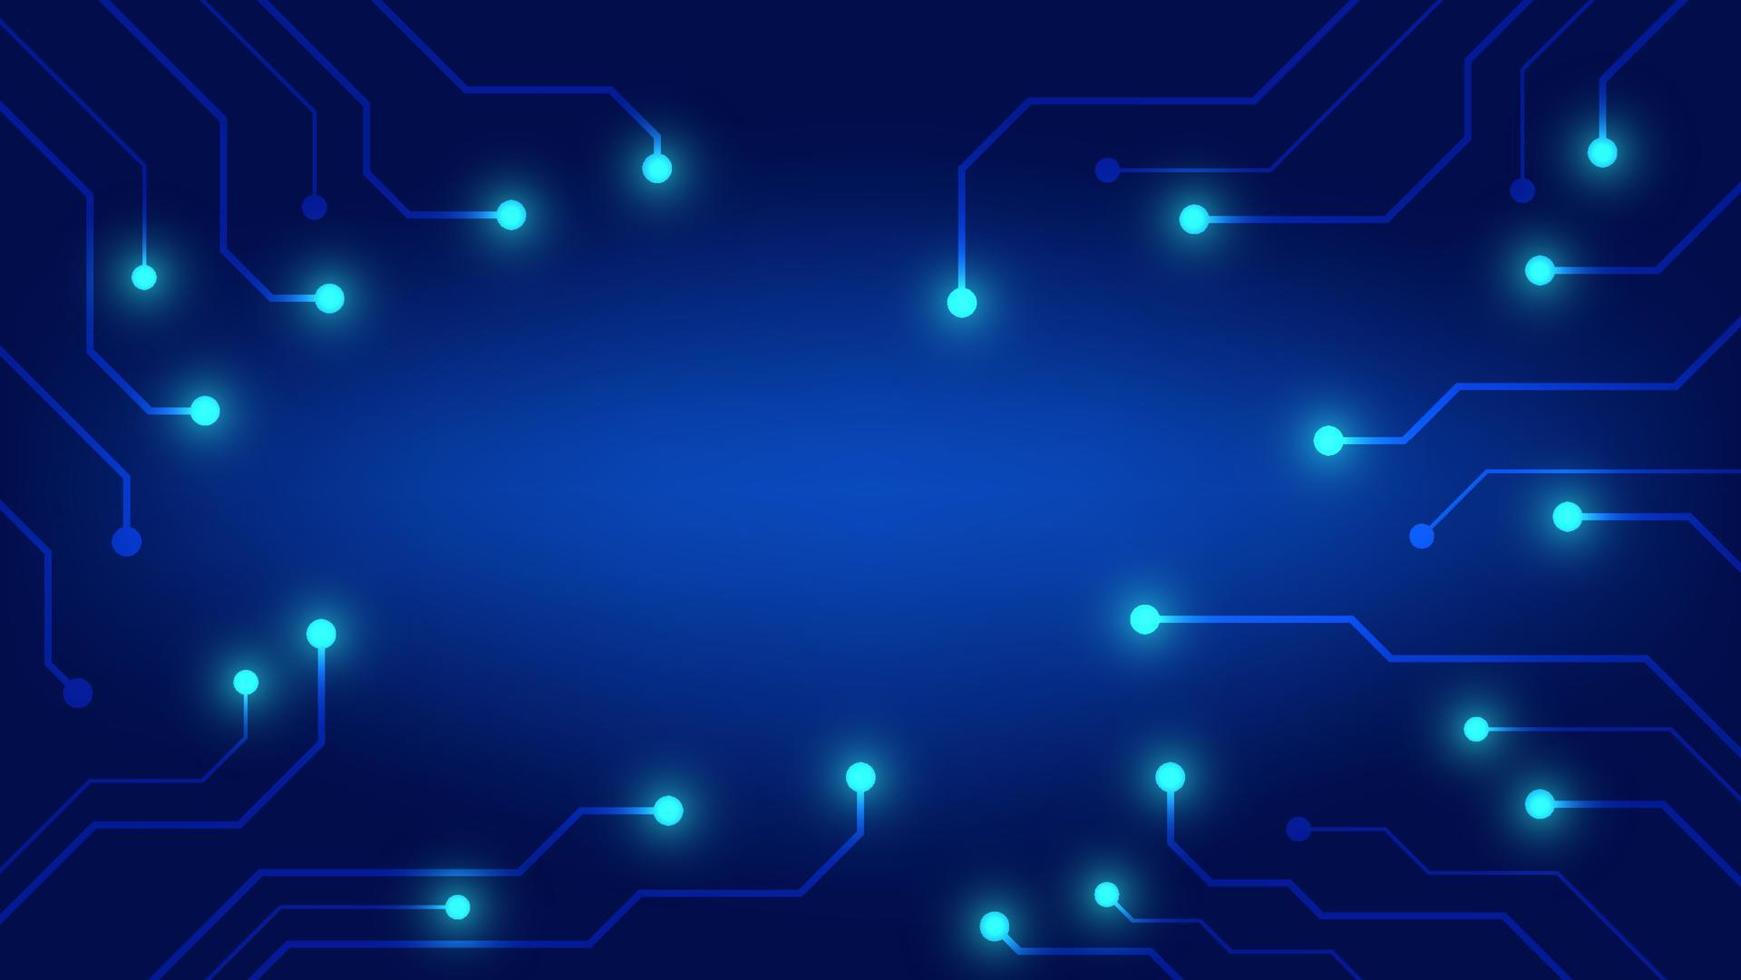 circuit board with blue lighting background. technology and Hi tech graphic design element concept vector